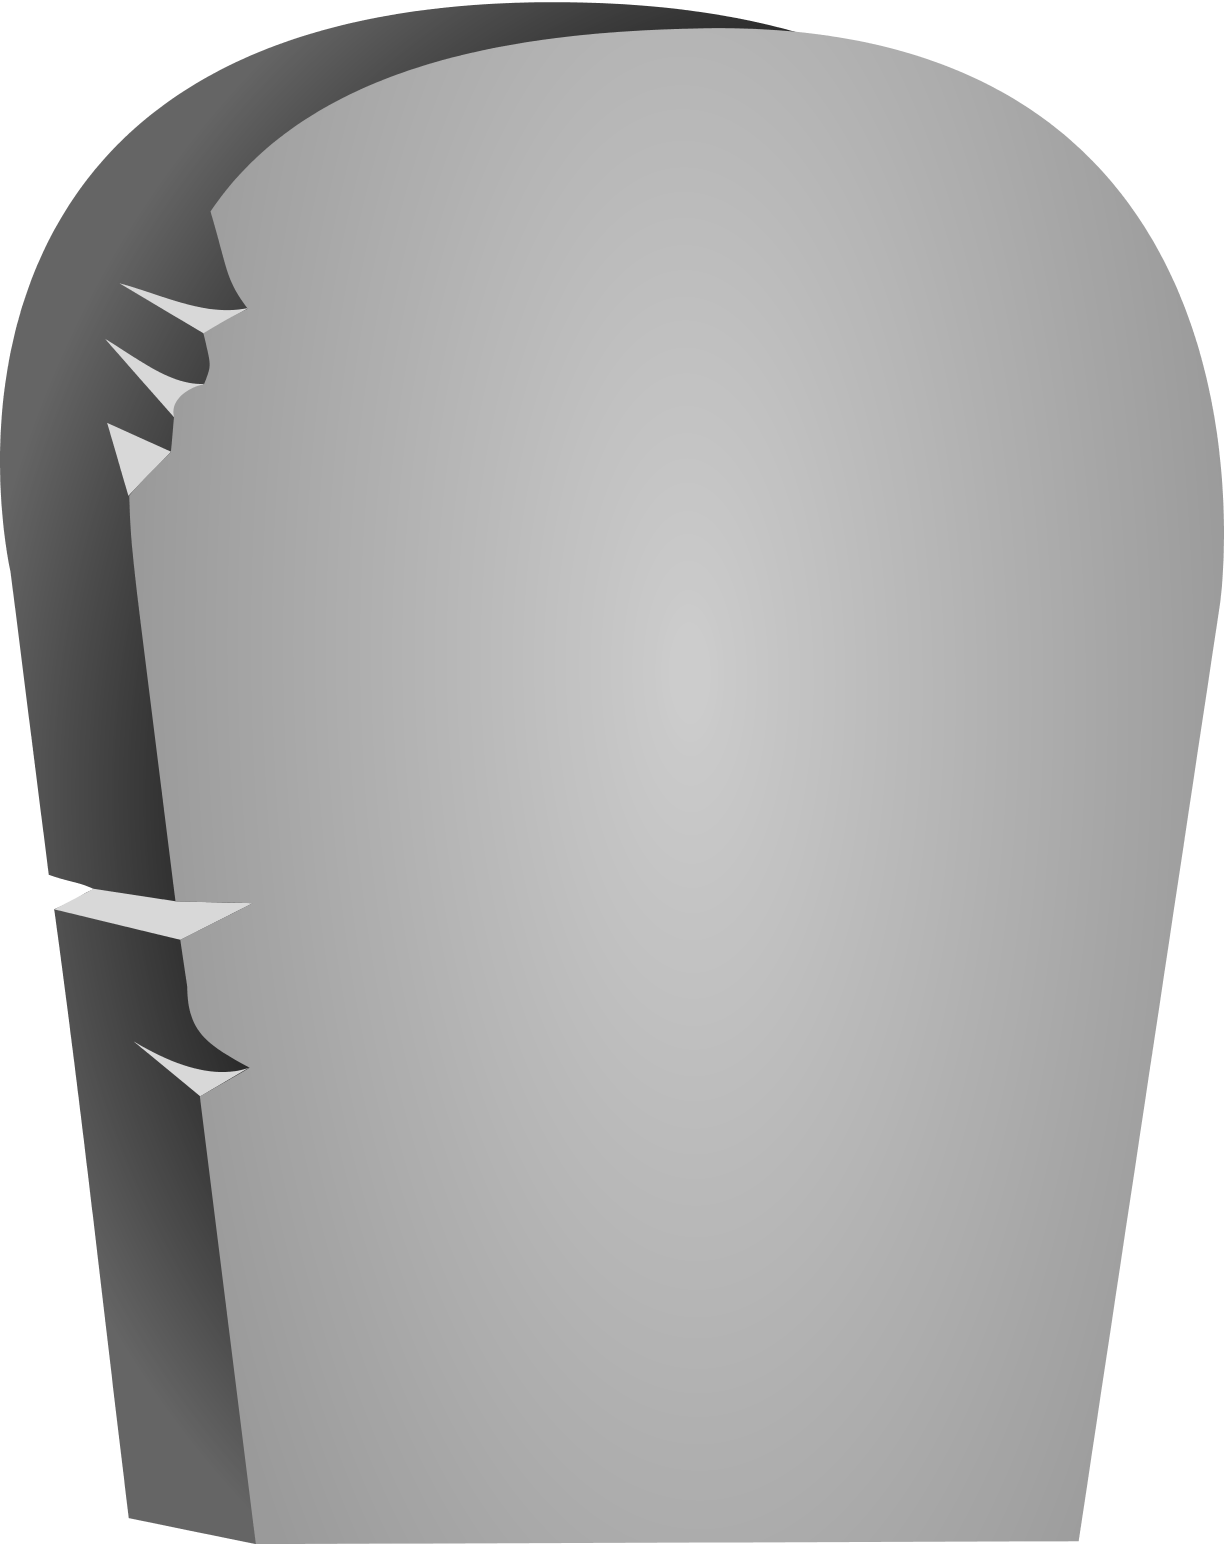 rip clipart tombstone clipart